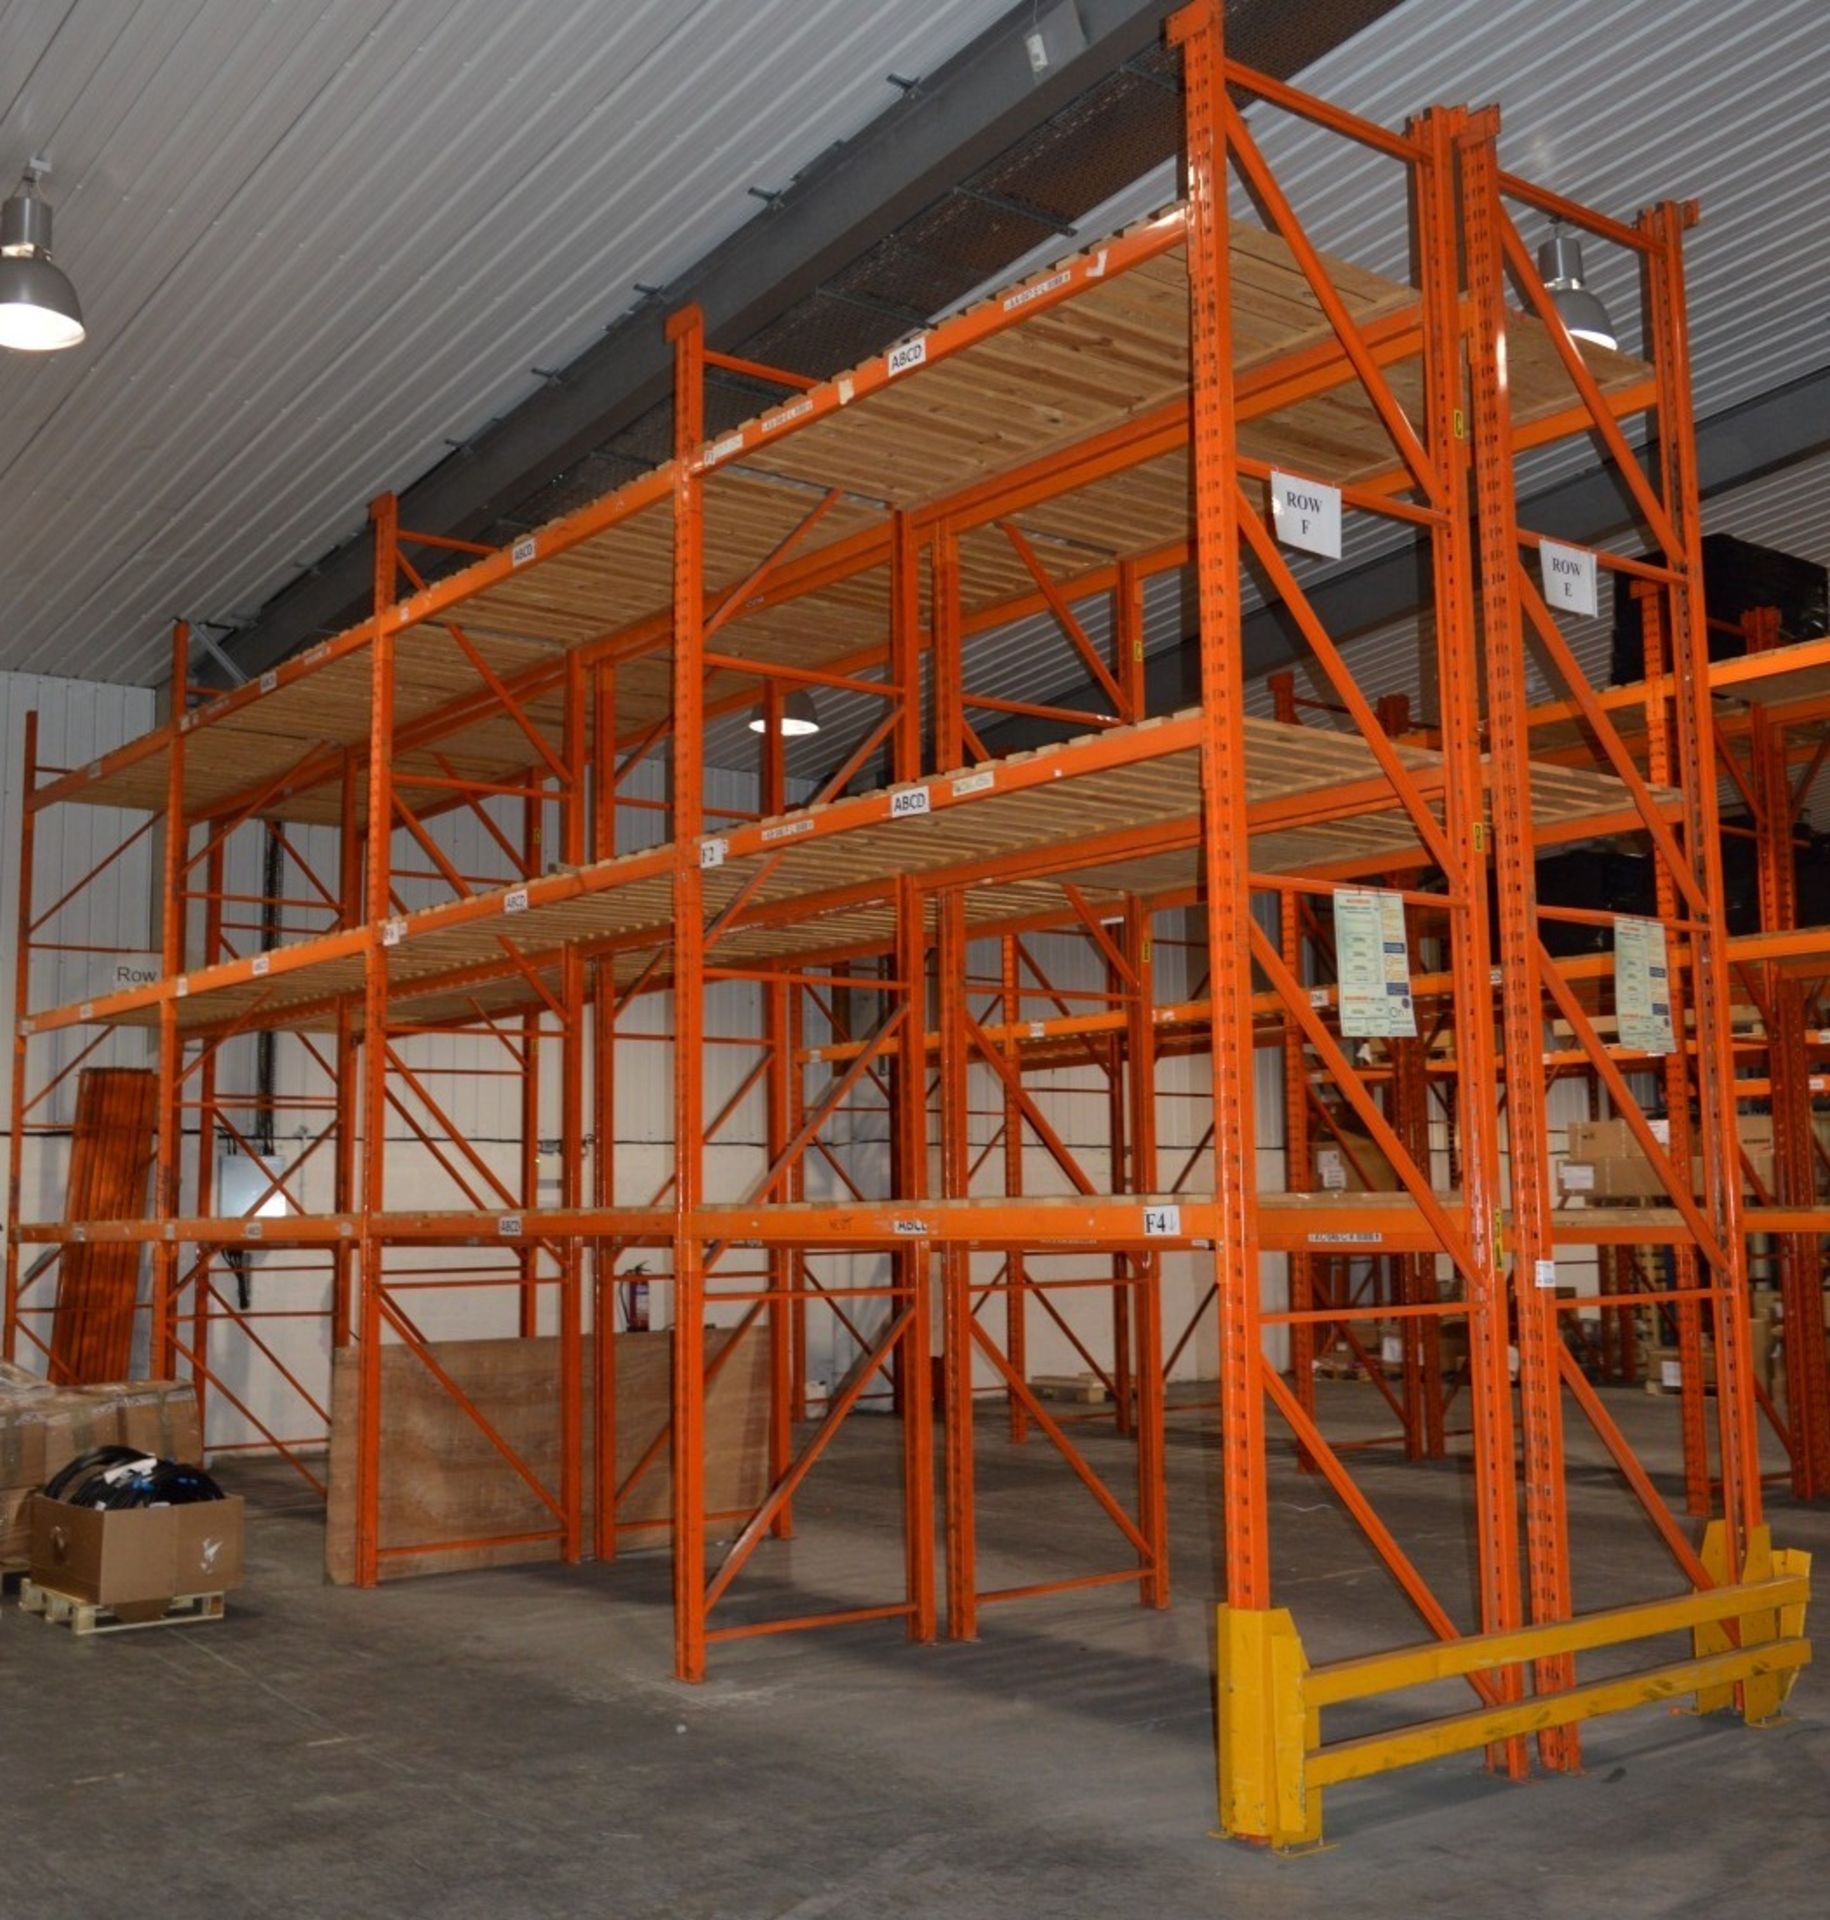 8 x Bays of Warehouse PALLET RACKING - Lot Includes 110 x Uprights, 56 x Crossbeams, 1 x